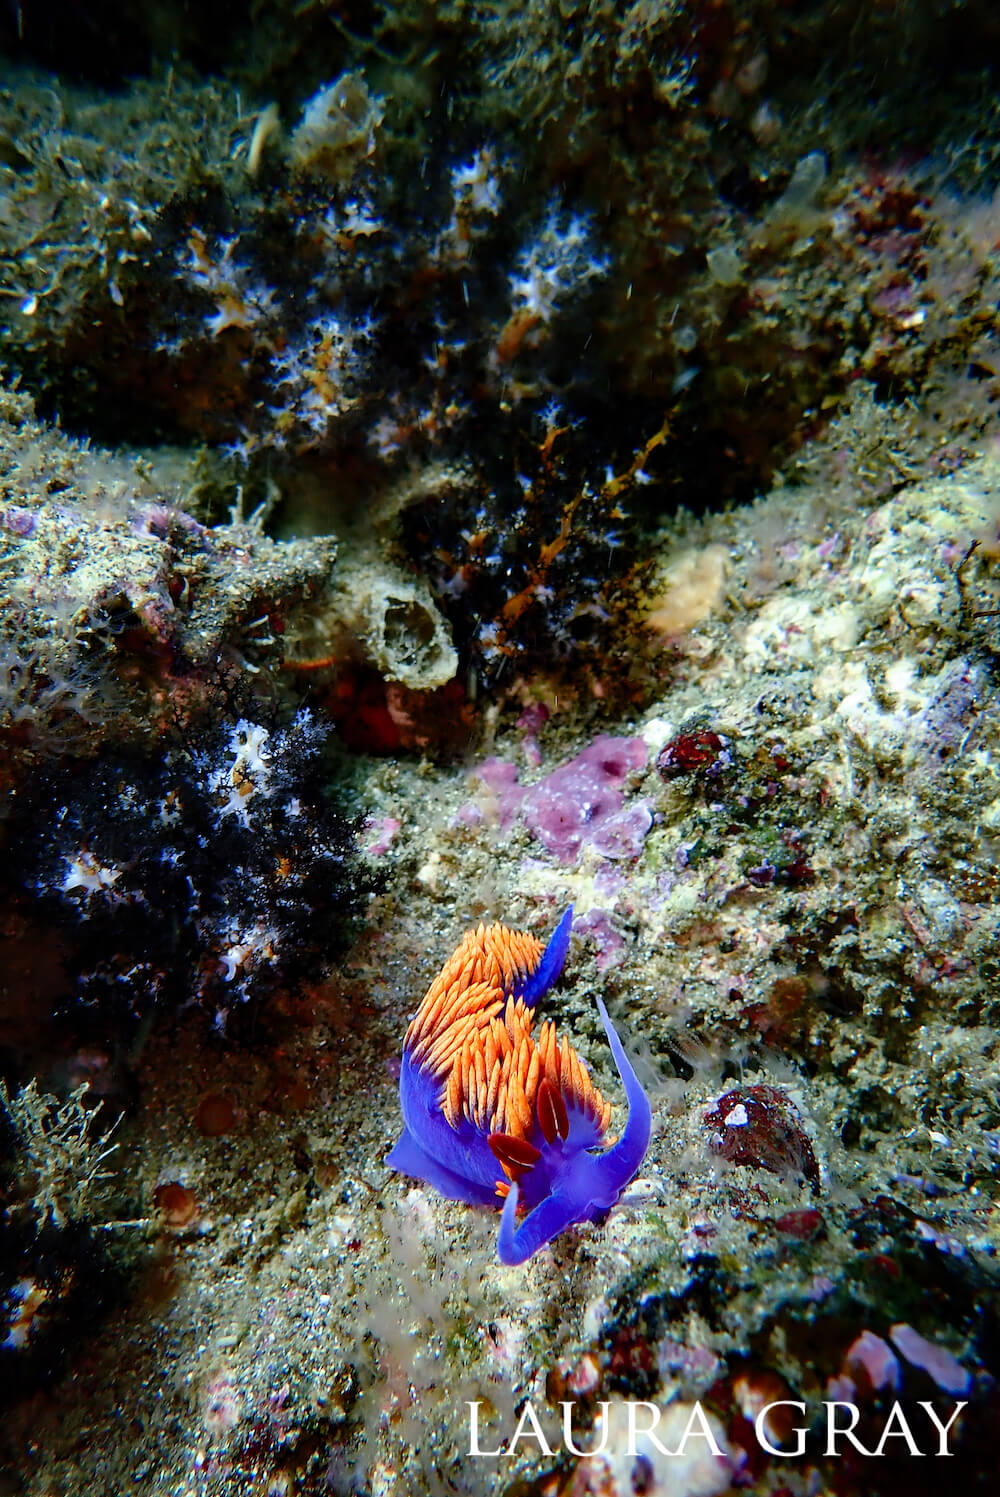 A Spanish shawl nudibranch on rocks and corals.